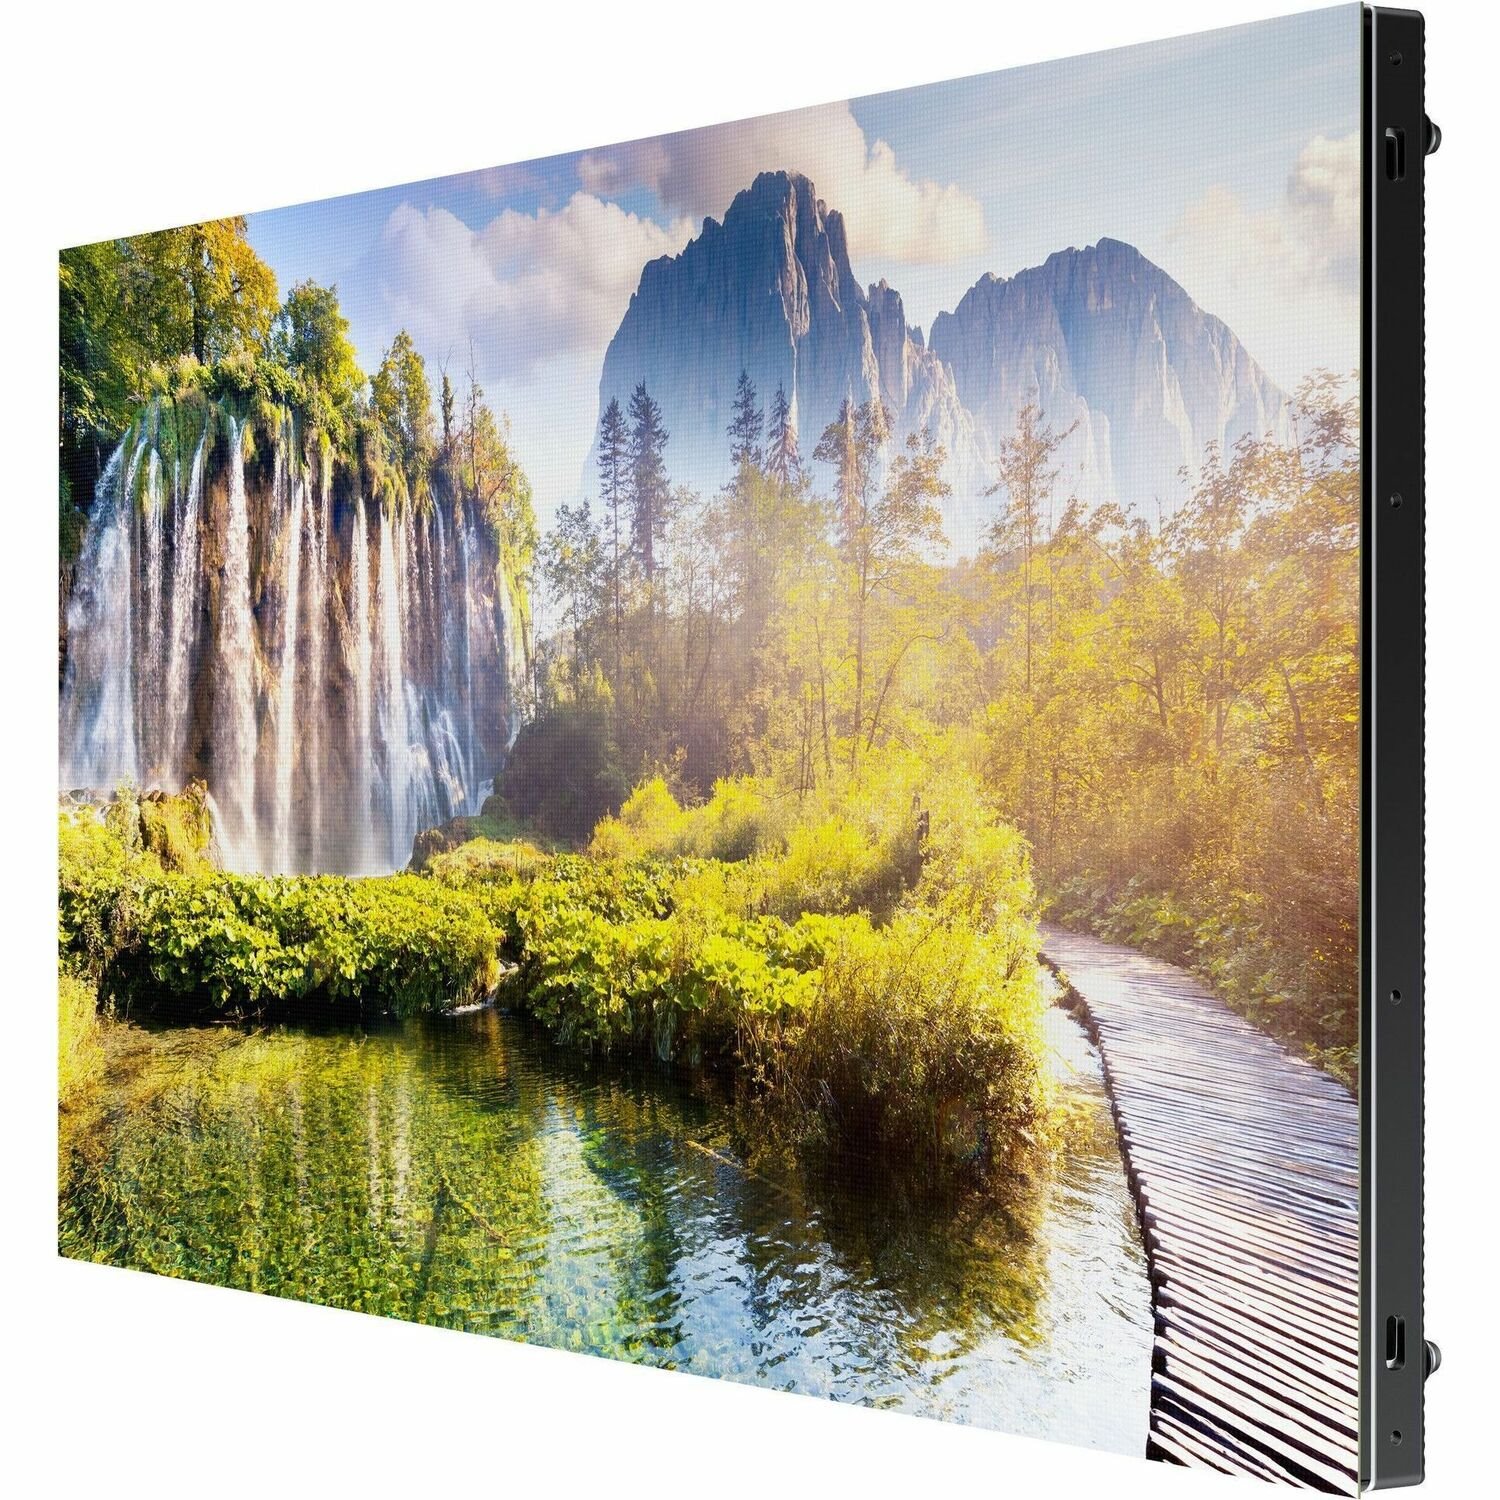 Samsung LED Cabinet 2.5mm Pixel Pitch IE025A